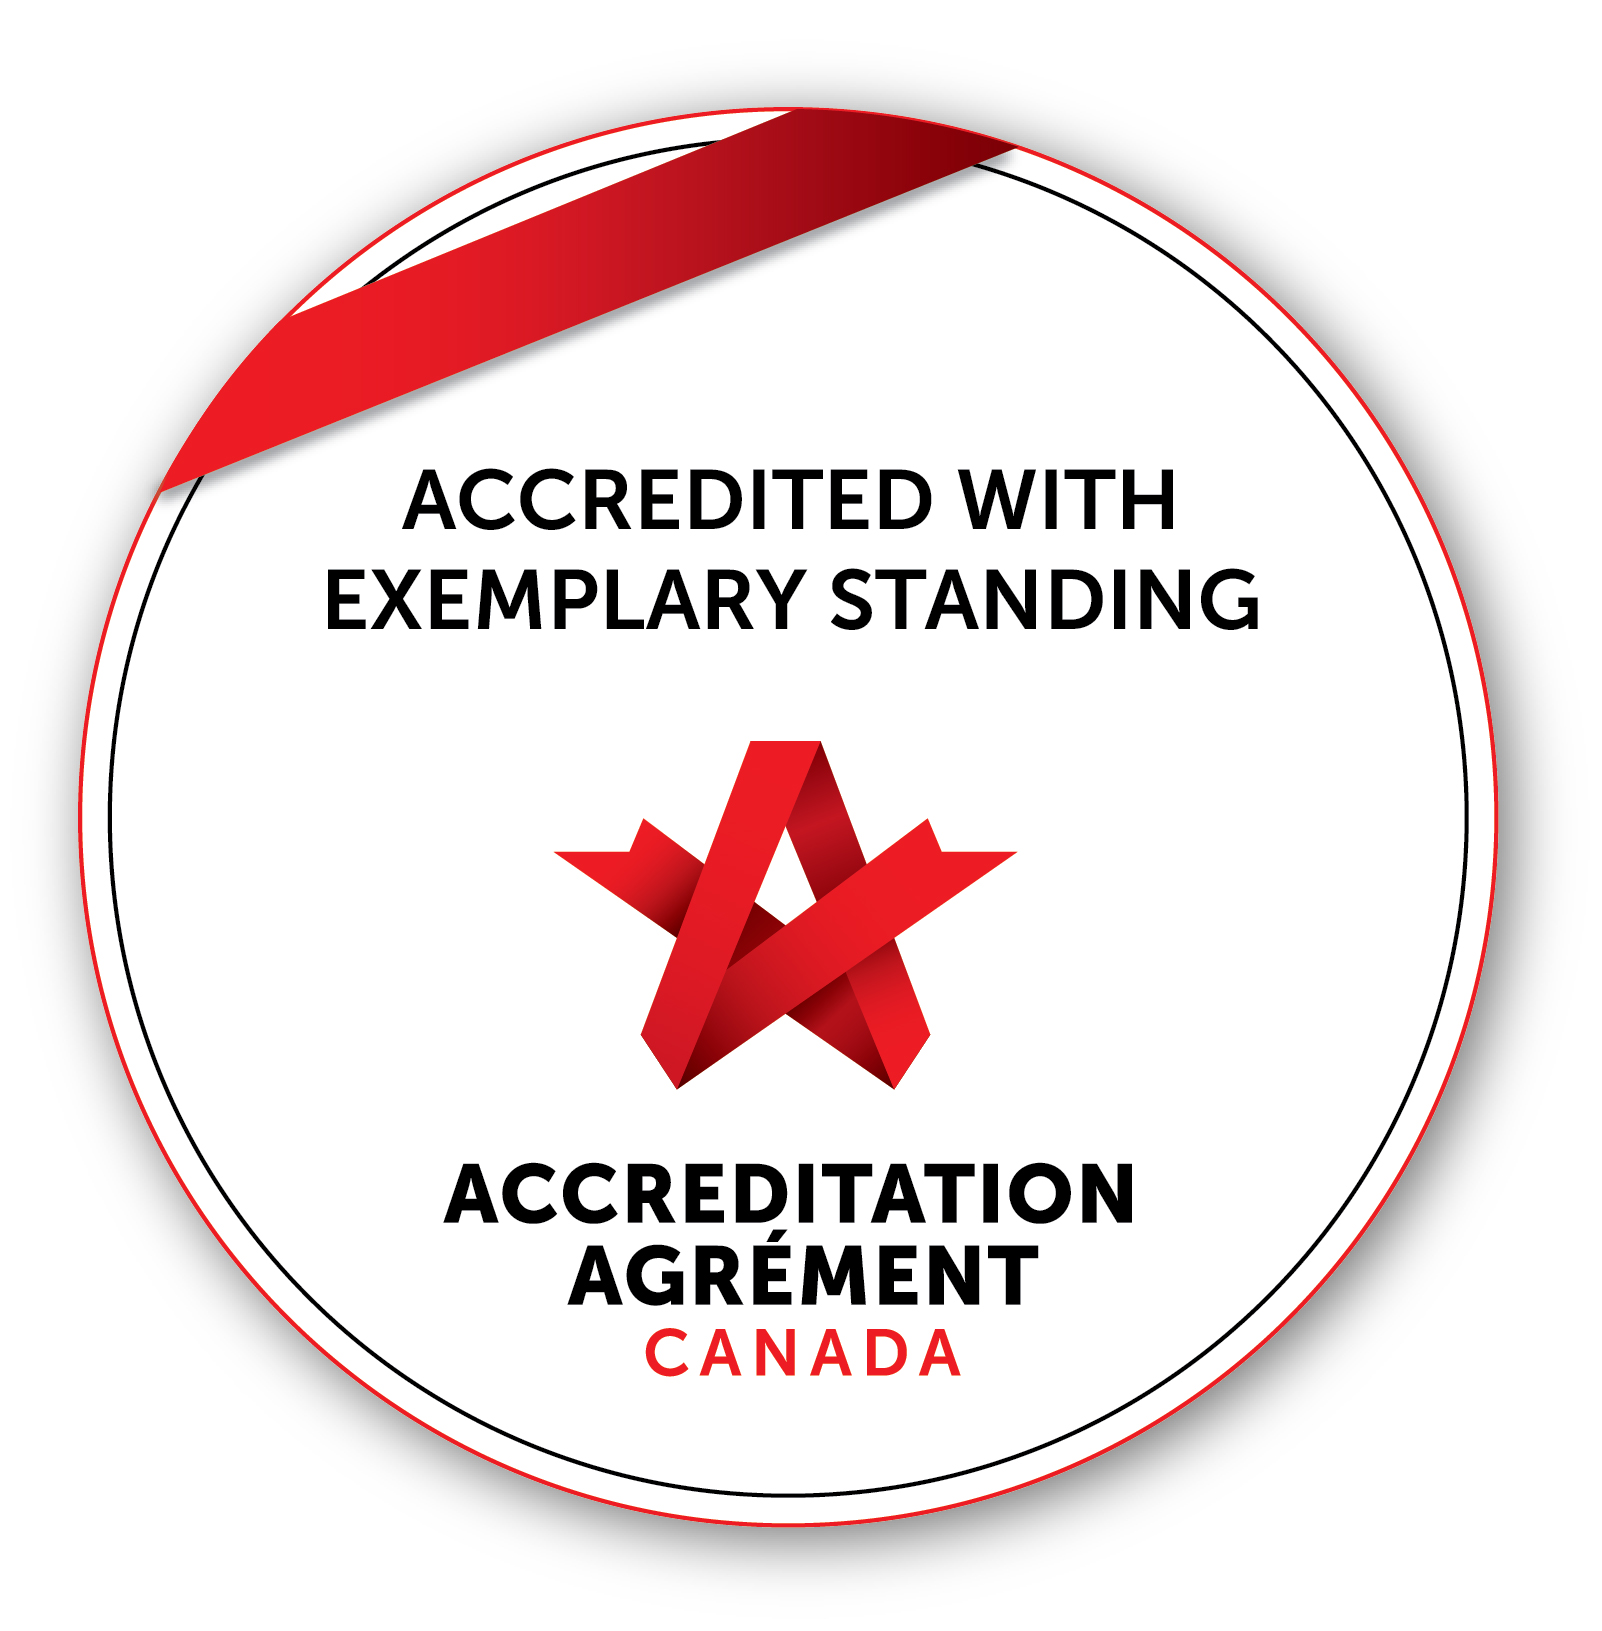 Accreditation with Exemplary Standing Seal